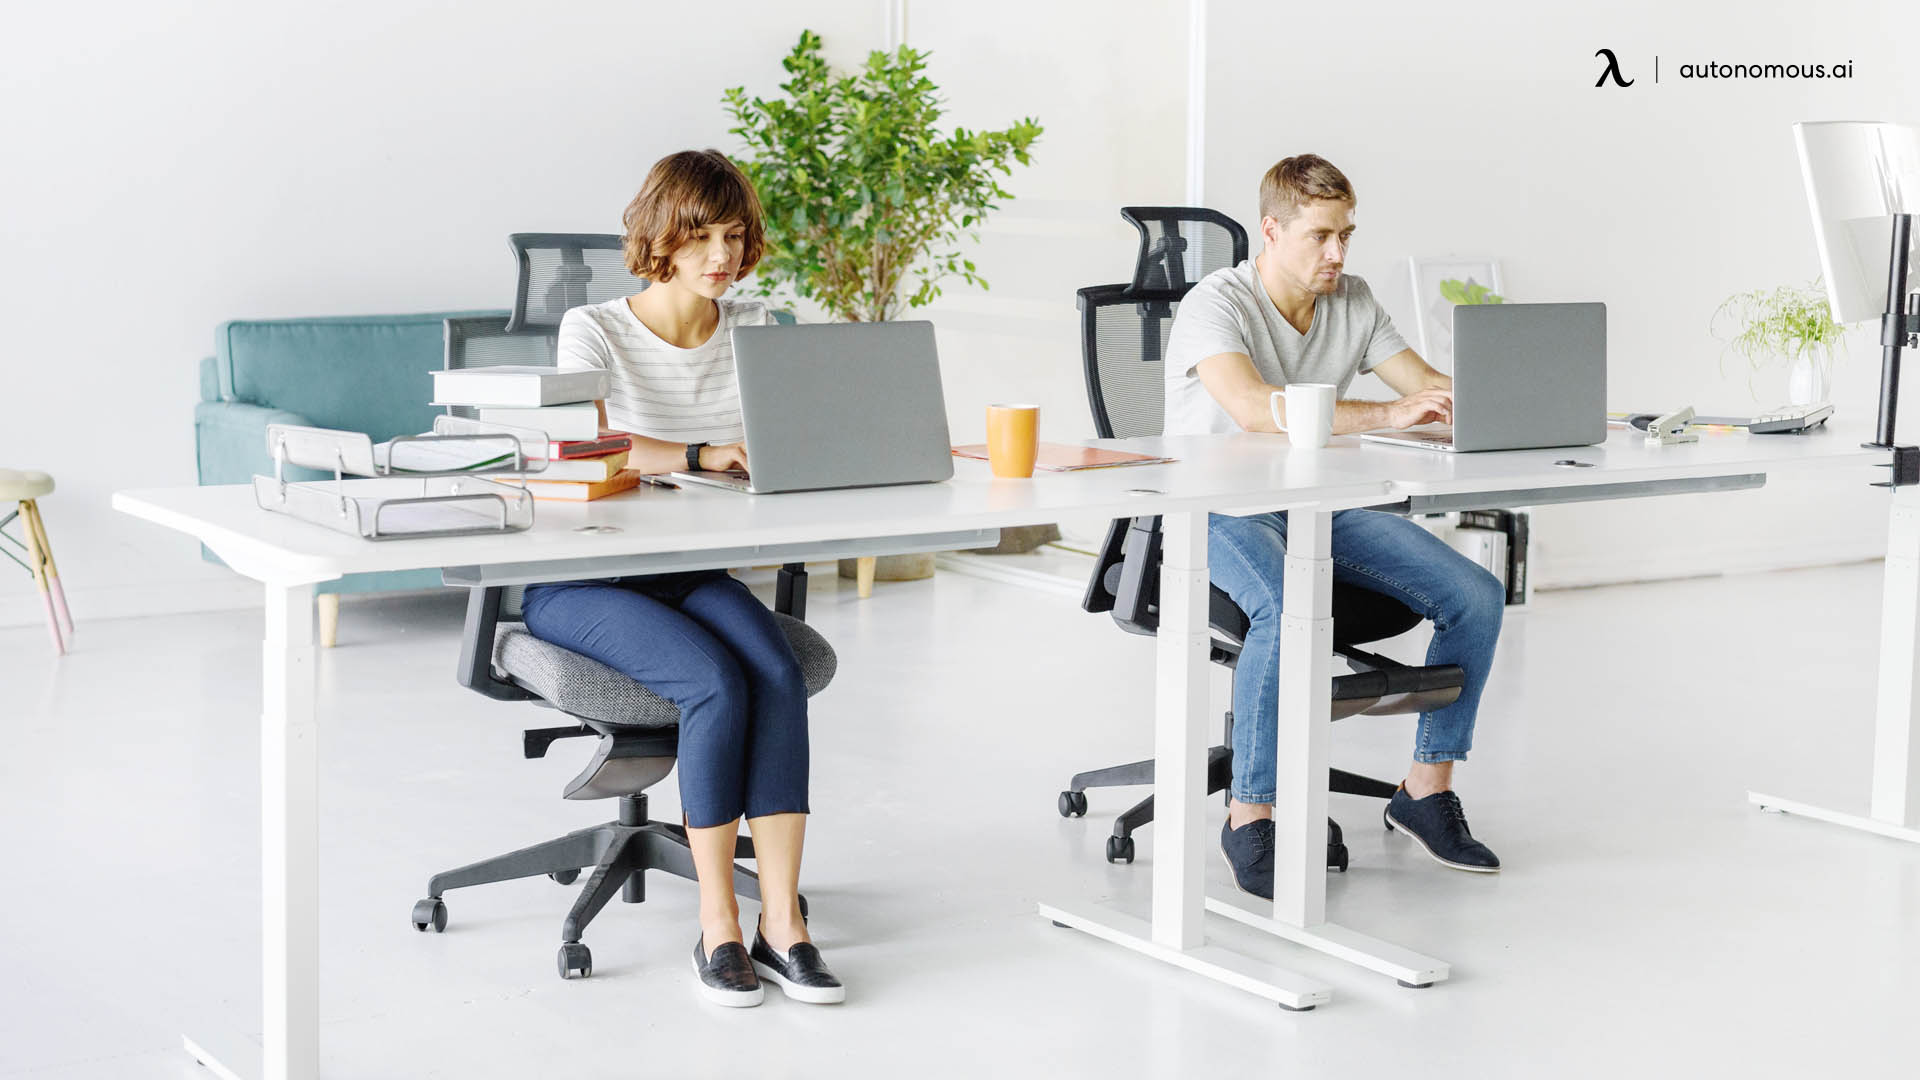 10 Best Ergonomic Chair in Australia: Top Seat Choices for 2022